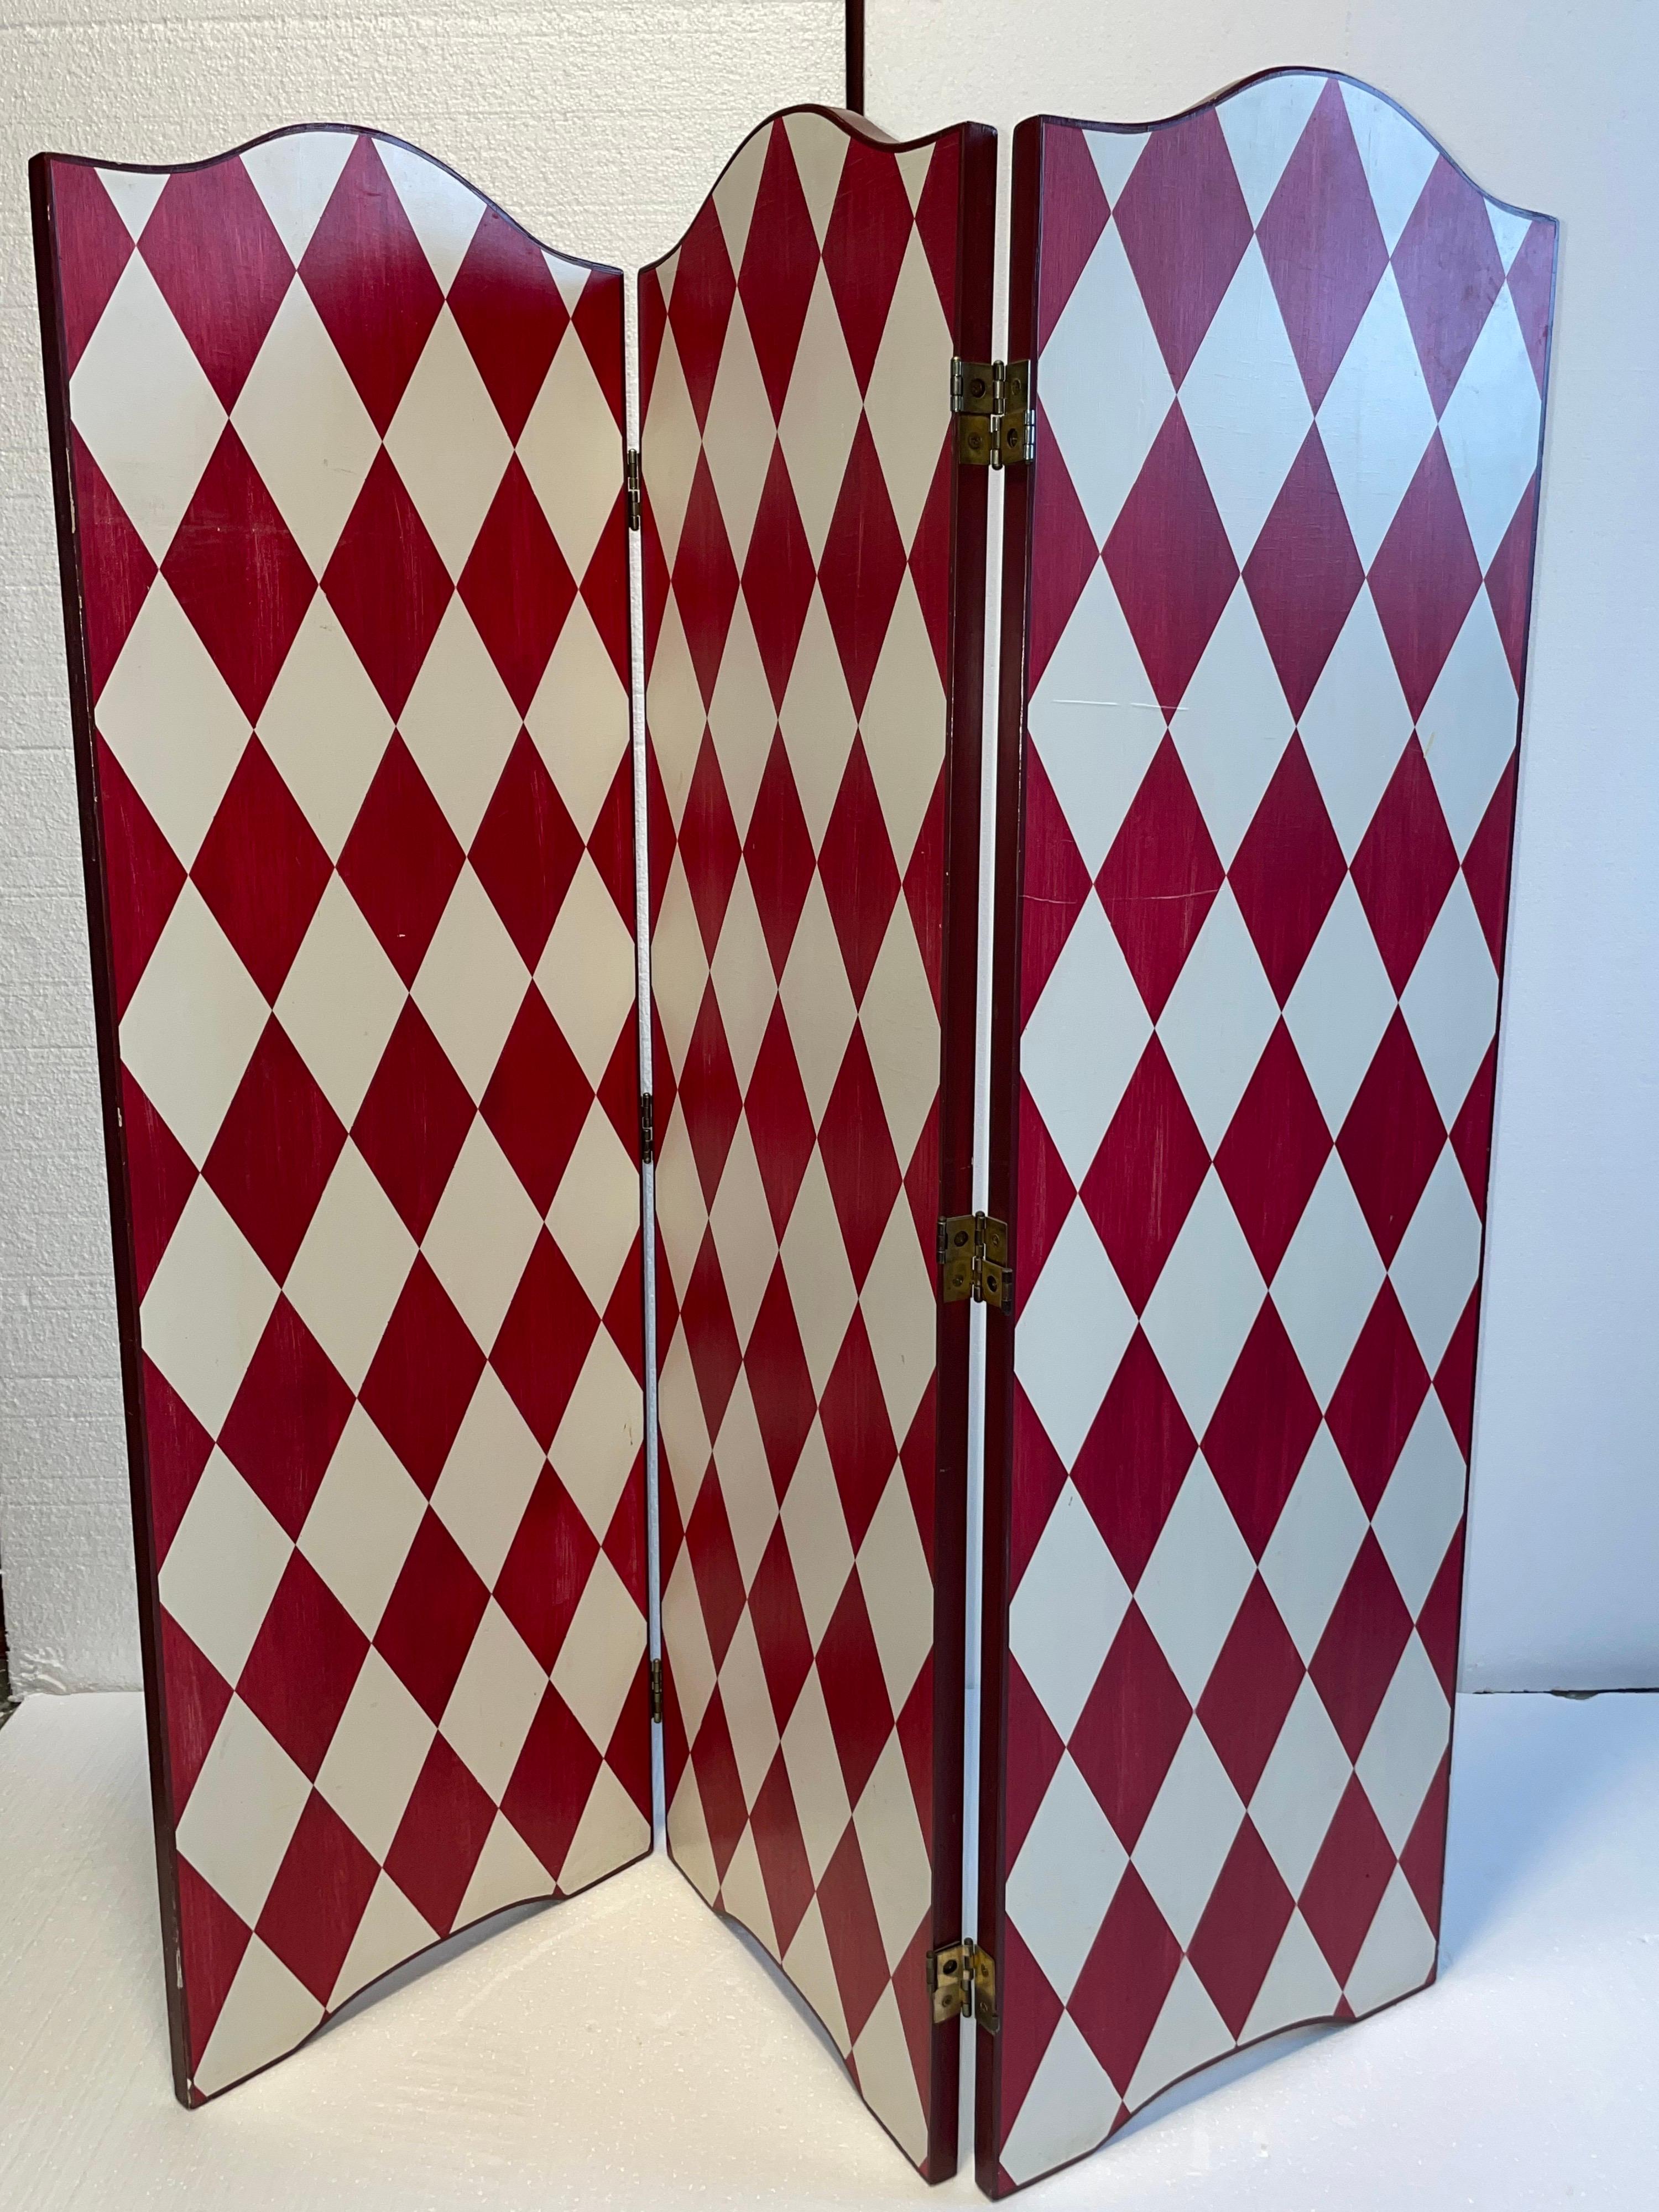 Artistic Hand Painted French Screen Divider in a Festive White and Deep Red For Sale 1